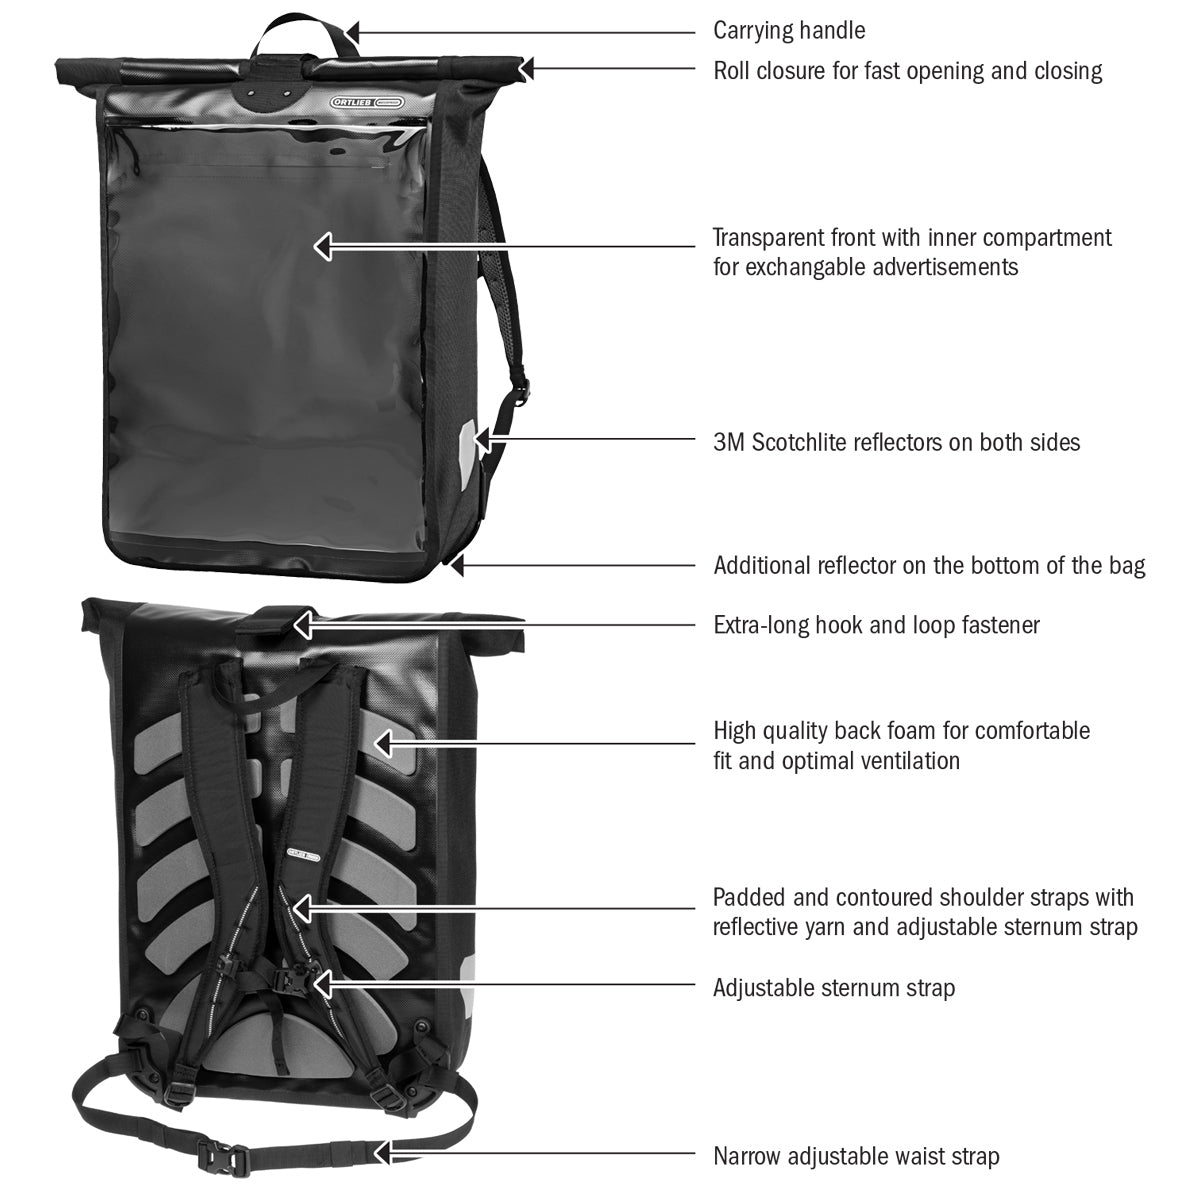 Ortlieb Messenger Bag Pro Features Overview